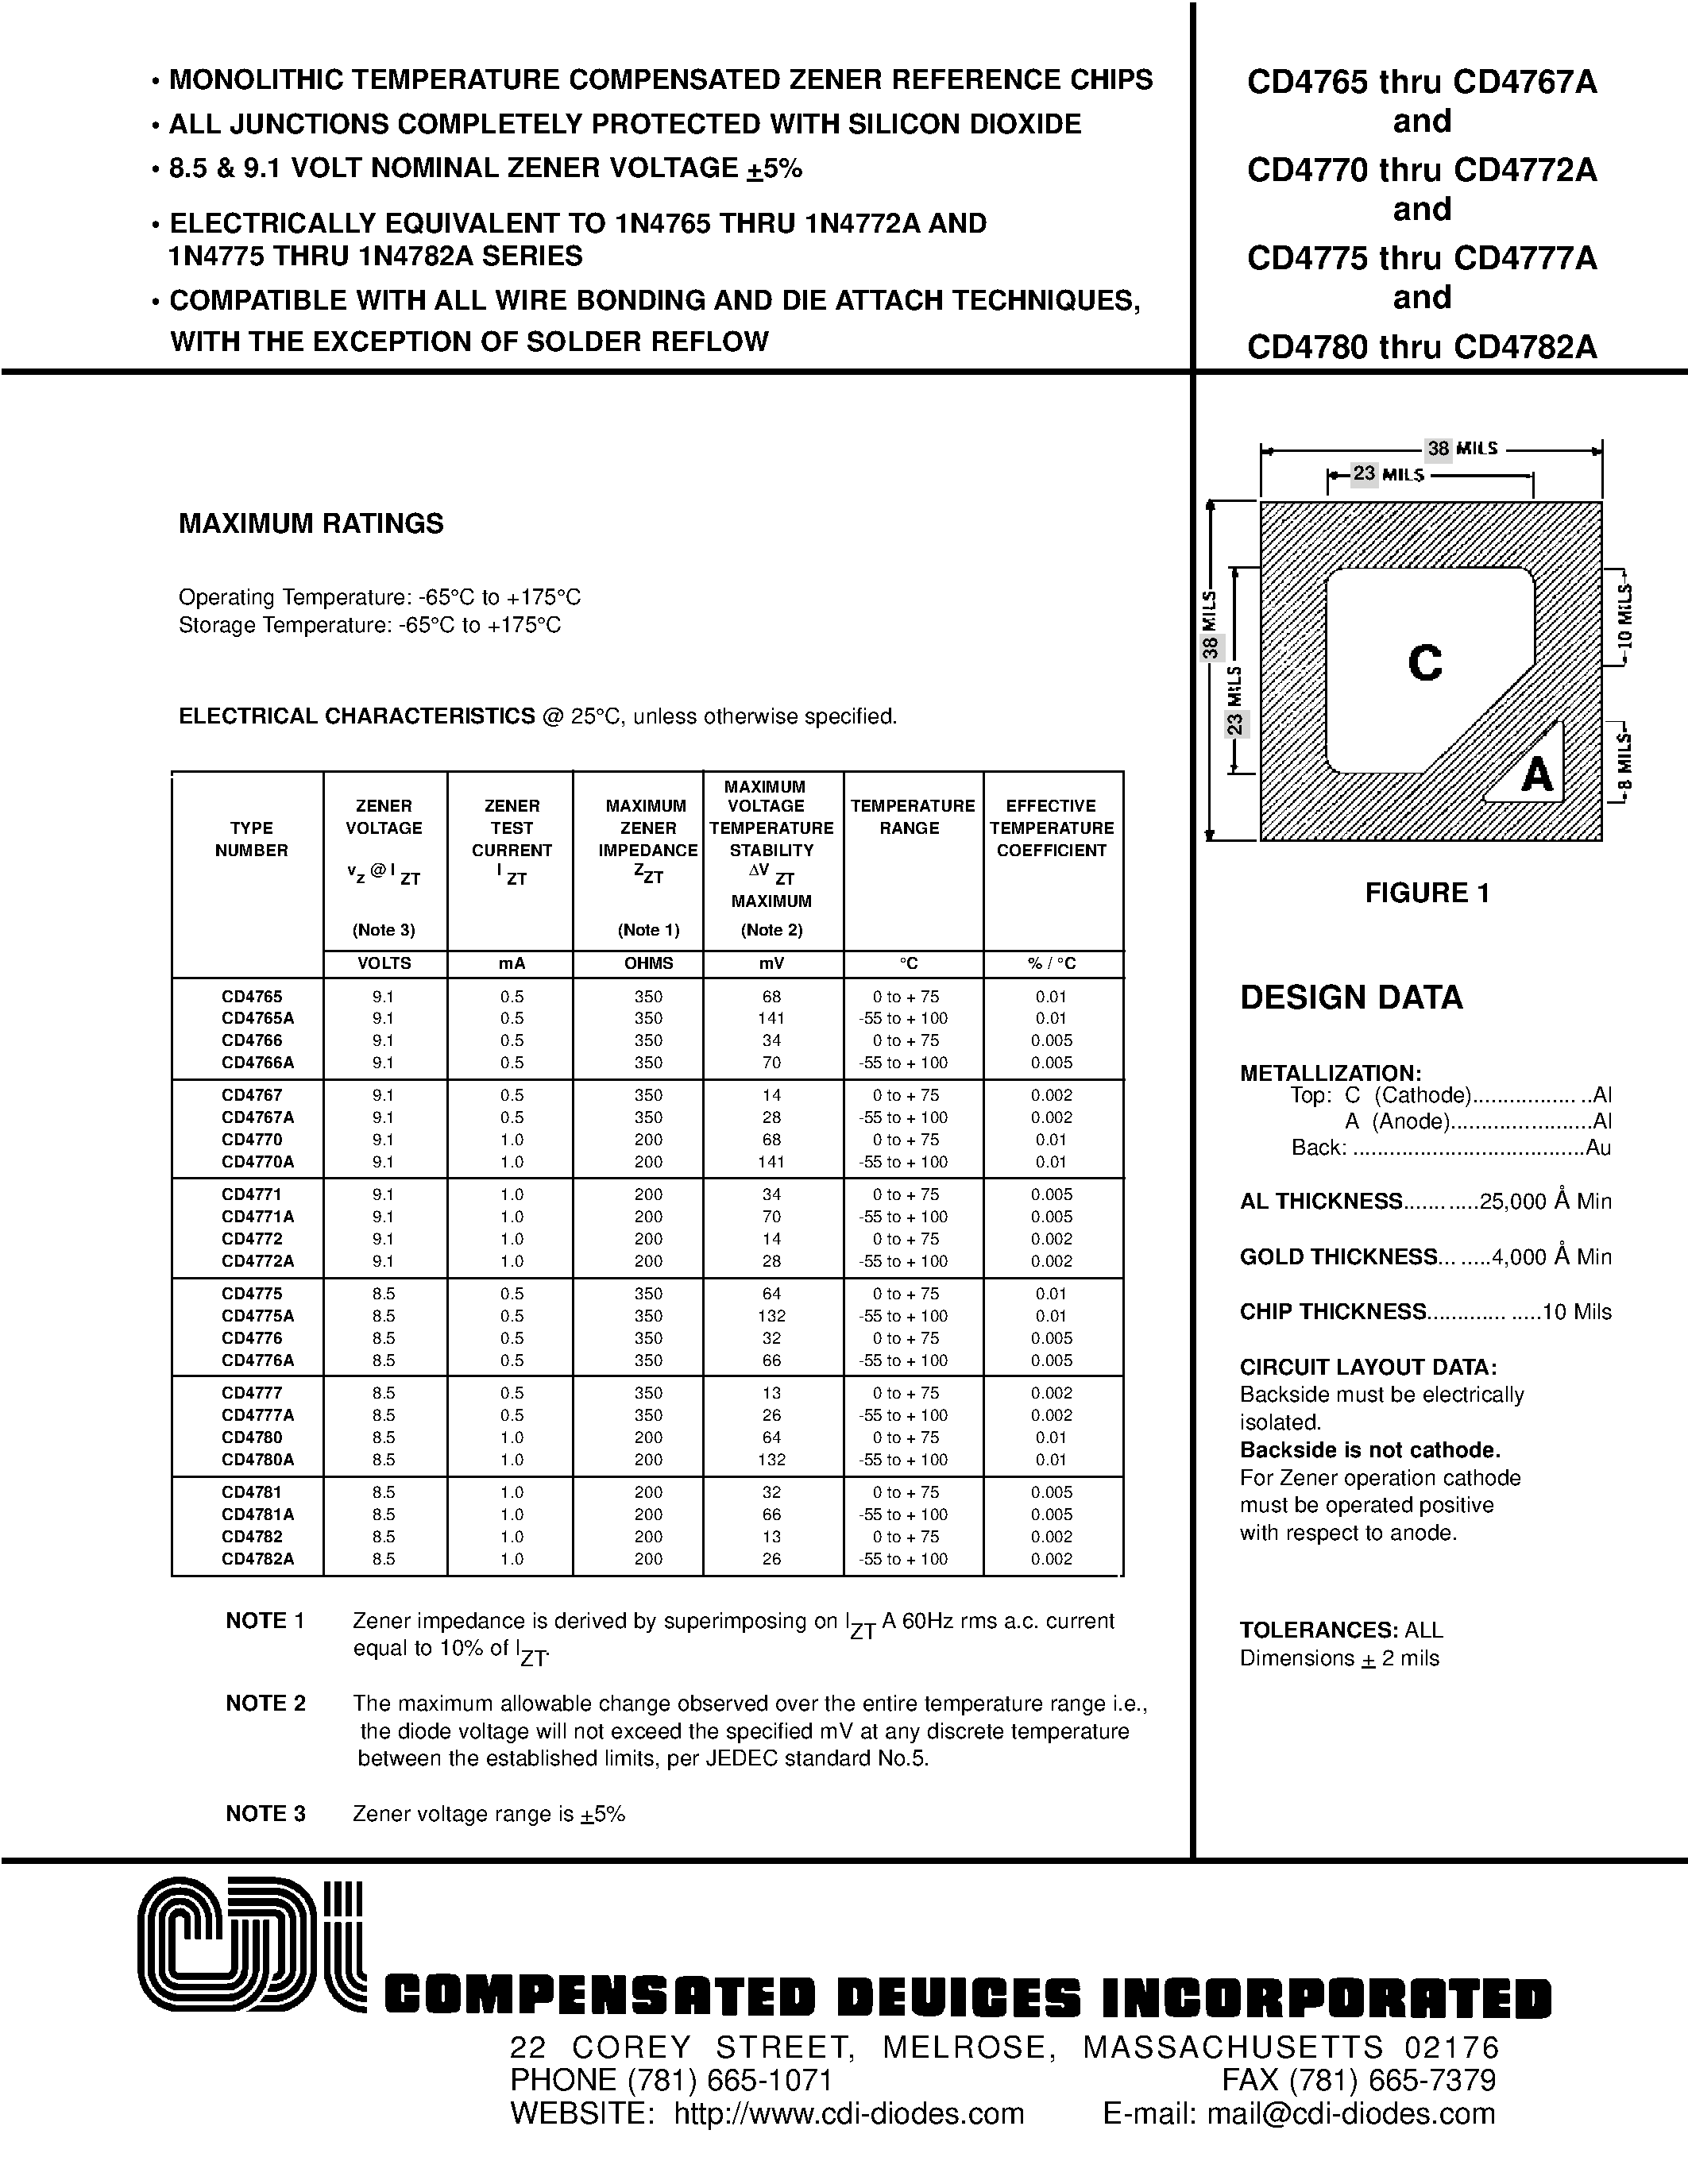 Datasheet CD4780A - MONOLITHIC TEMPERATURE COMPENSATED ZENER REFERENCE CHIPS page 1